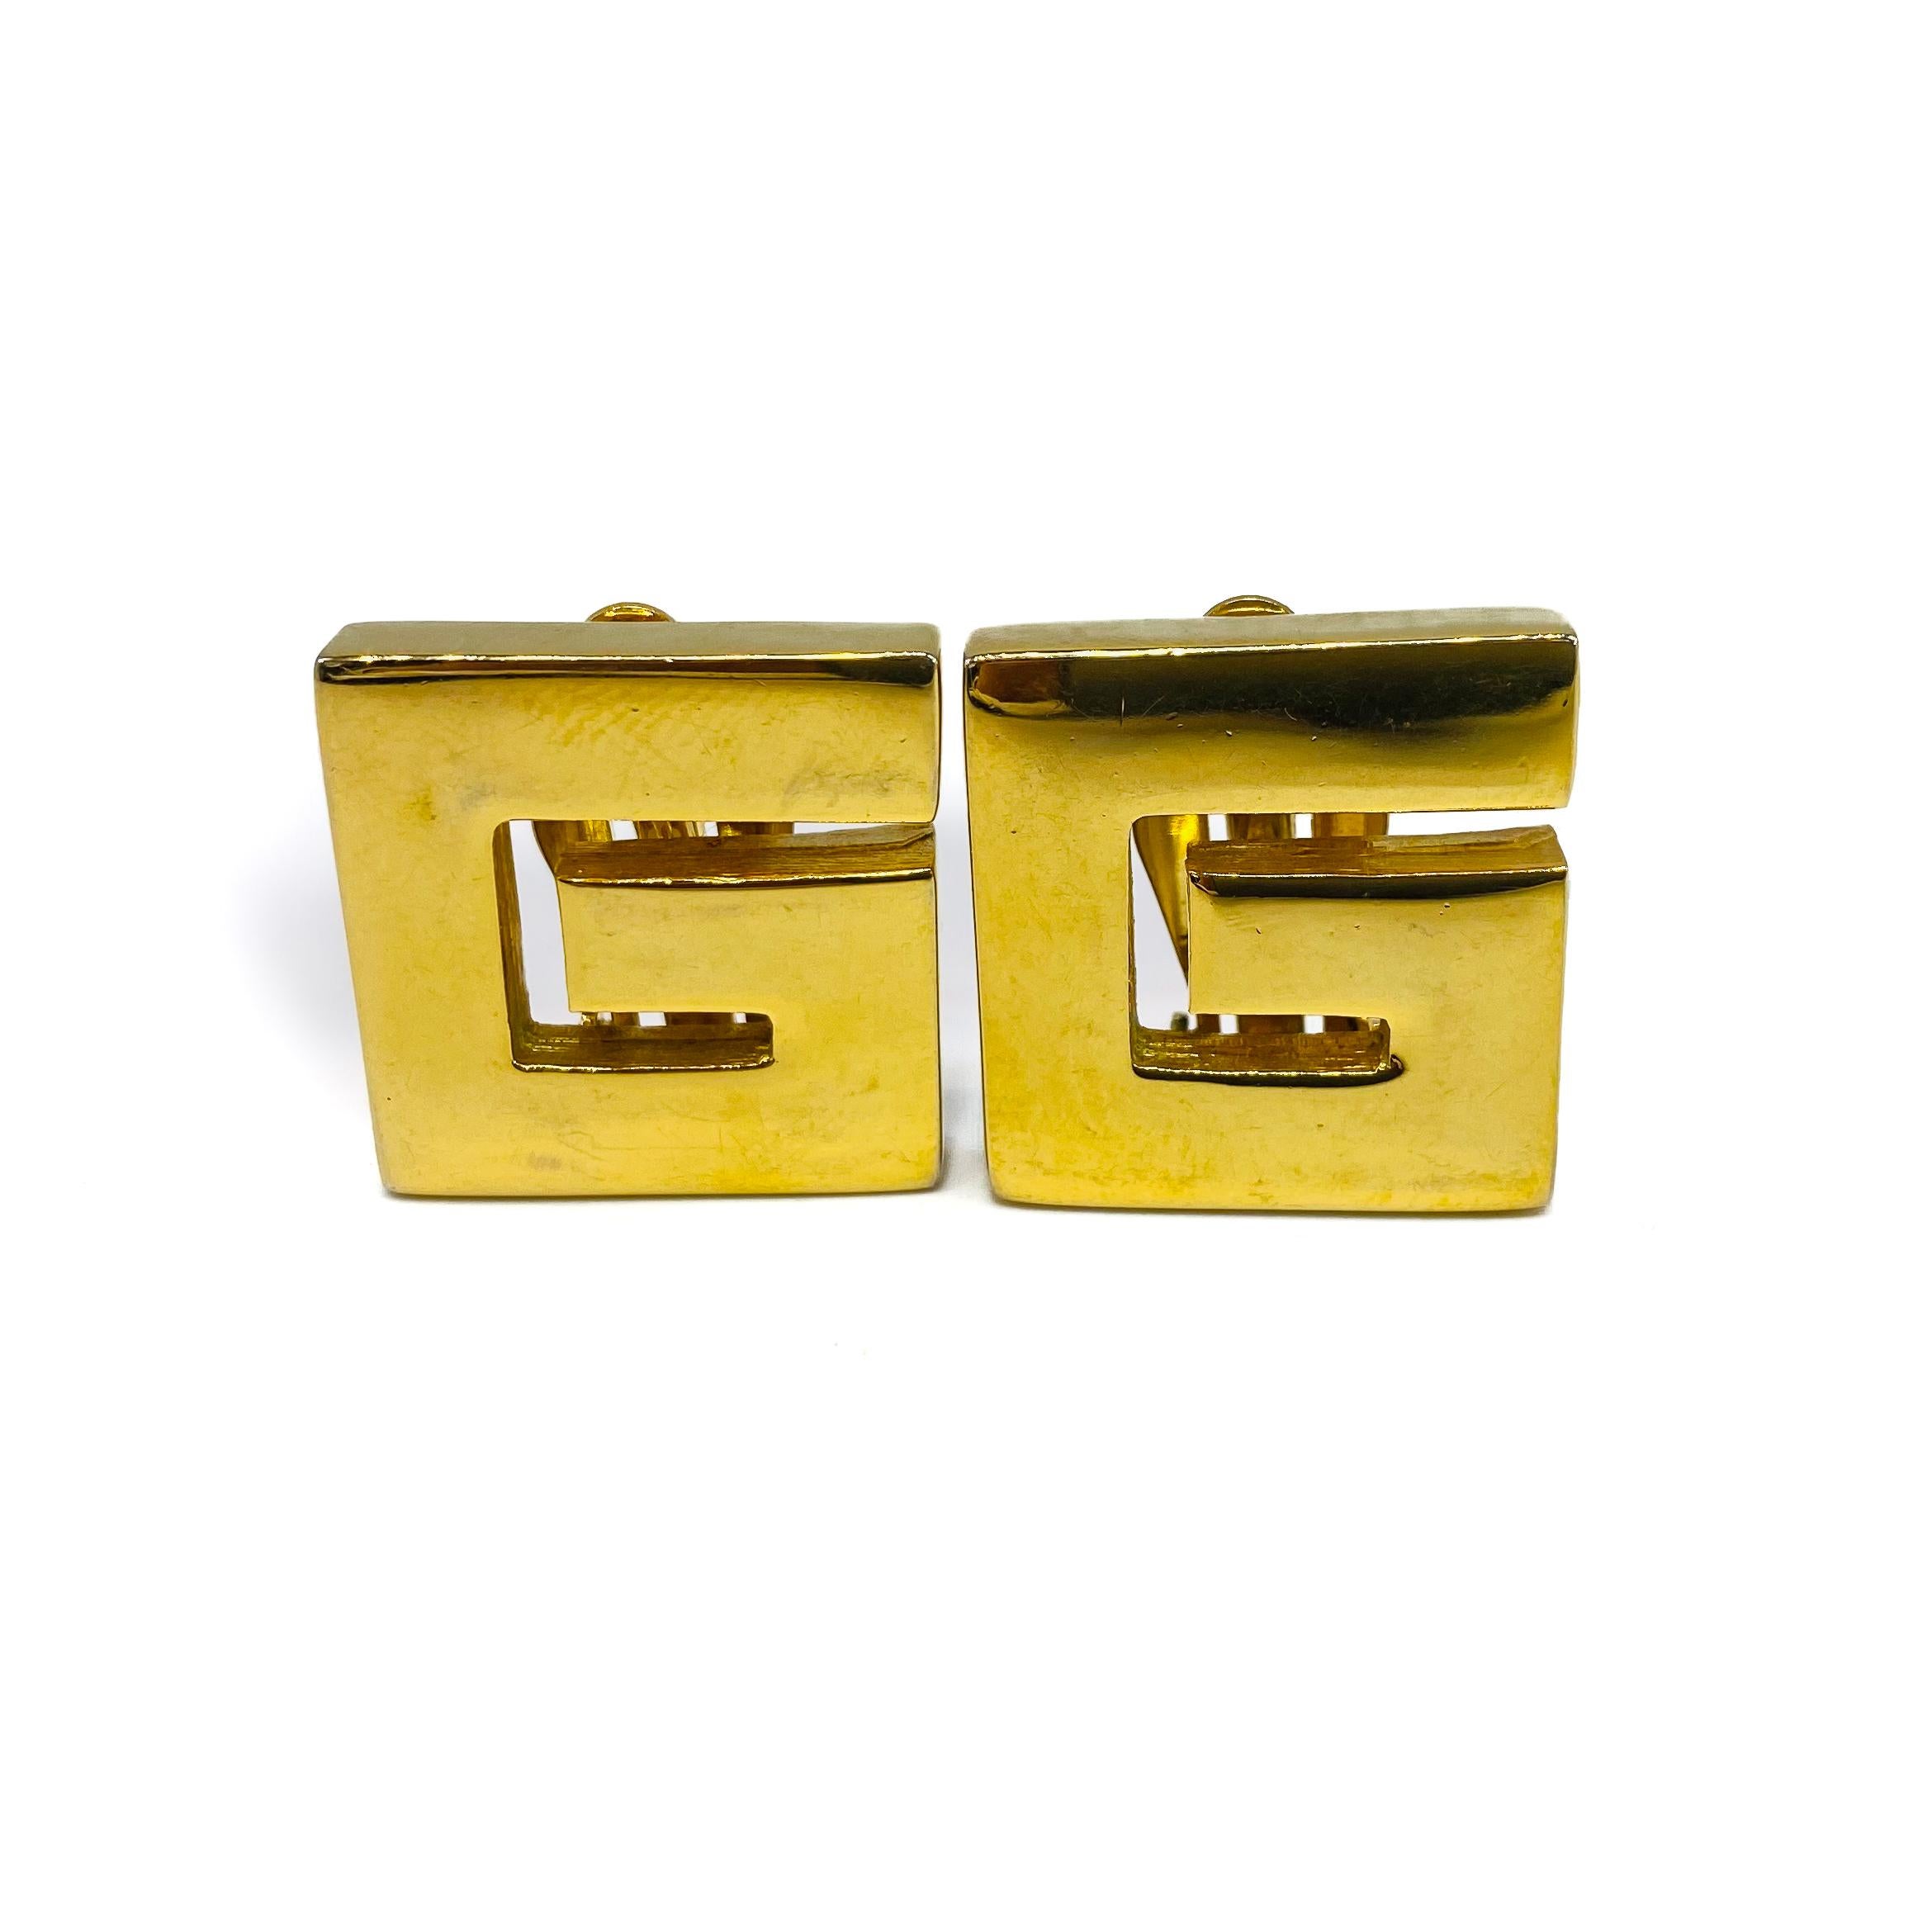 Givenchy Vintage 1980s Clip On Earrings

Super cool 'G' earrings from the iconic House of Hubert de Givenchy

Detail
-Made in the 1980s
-Crafted from gold plated metal
-A large 'G' for Givenchy

Size & Fit
-7/8 inch across
-Clip on